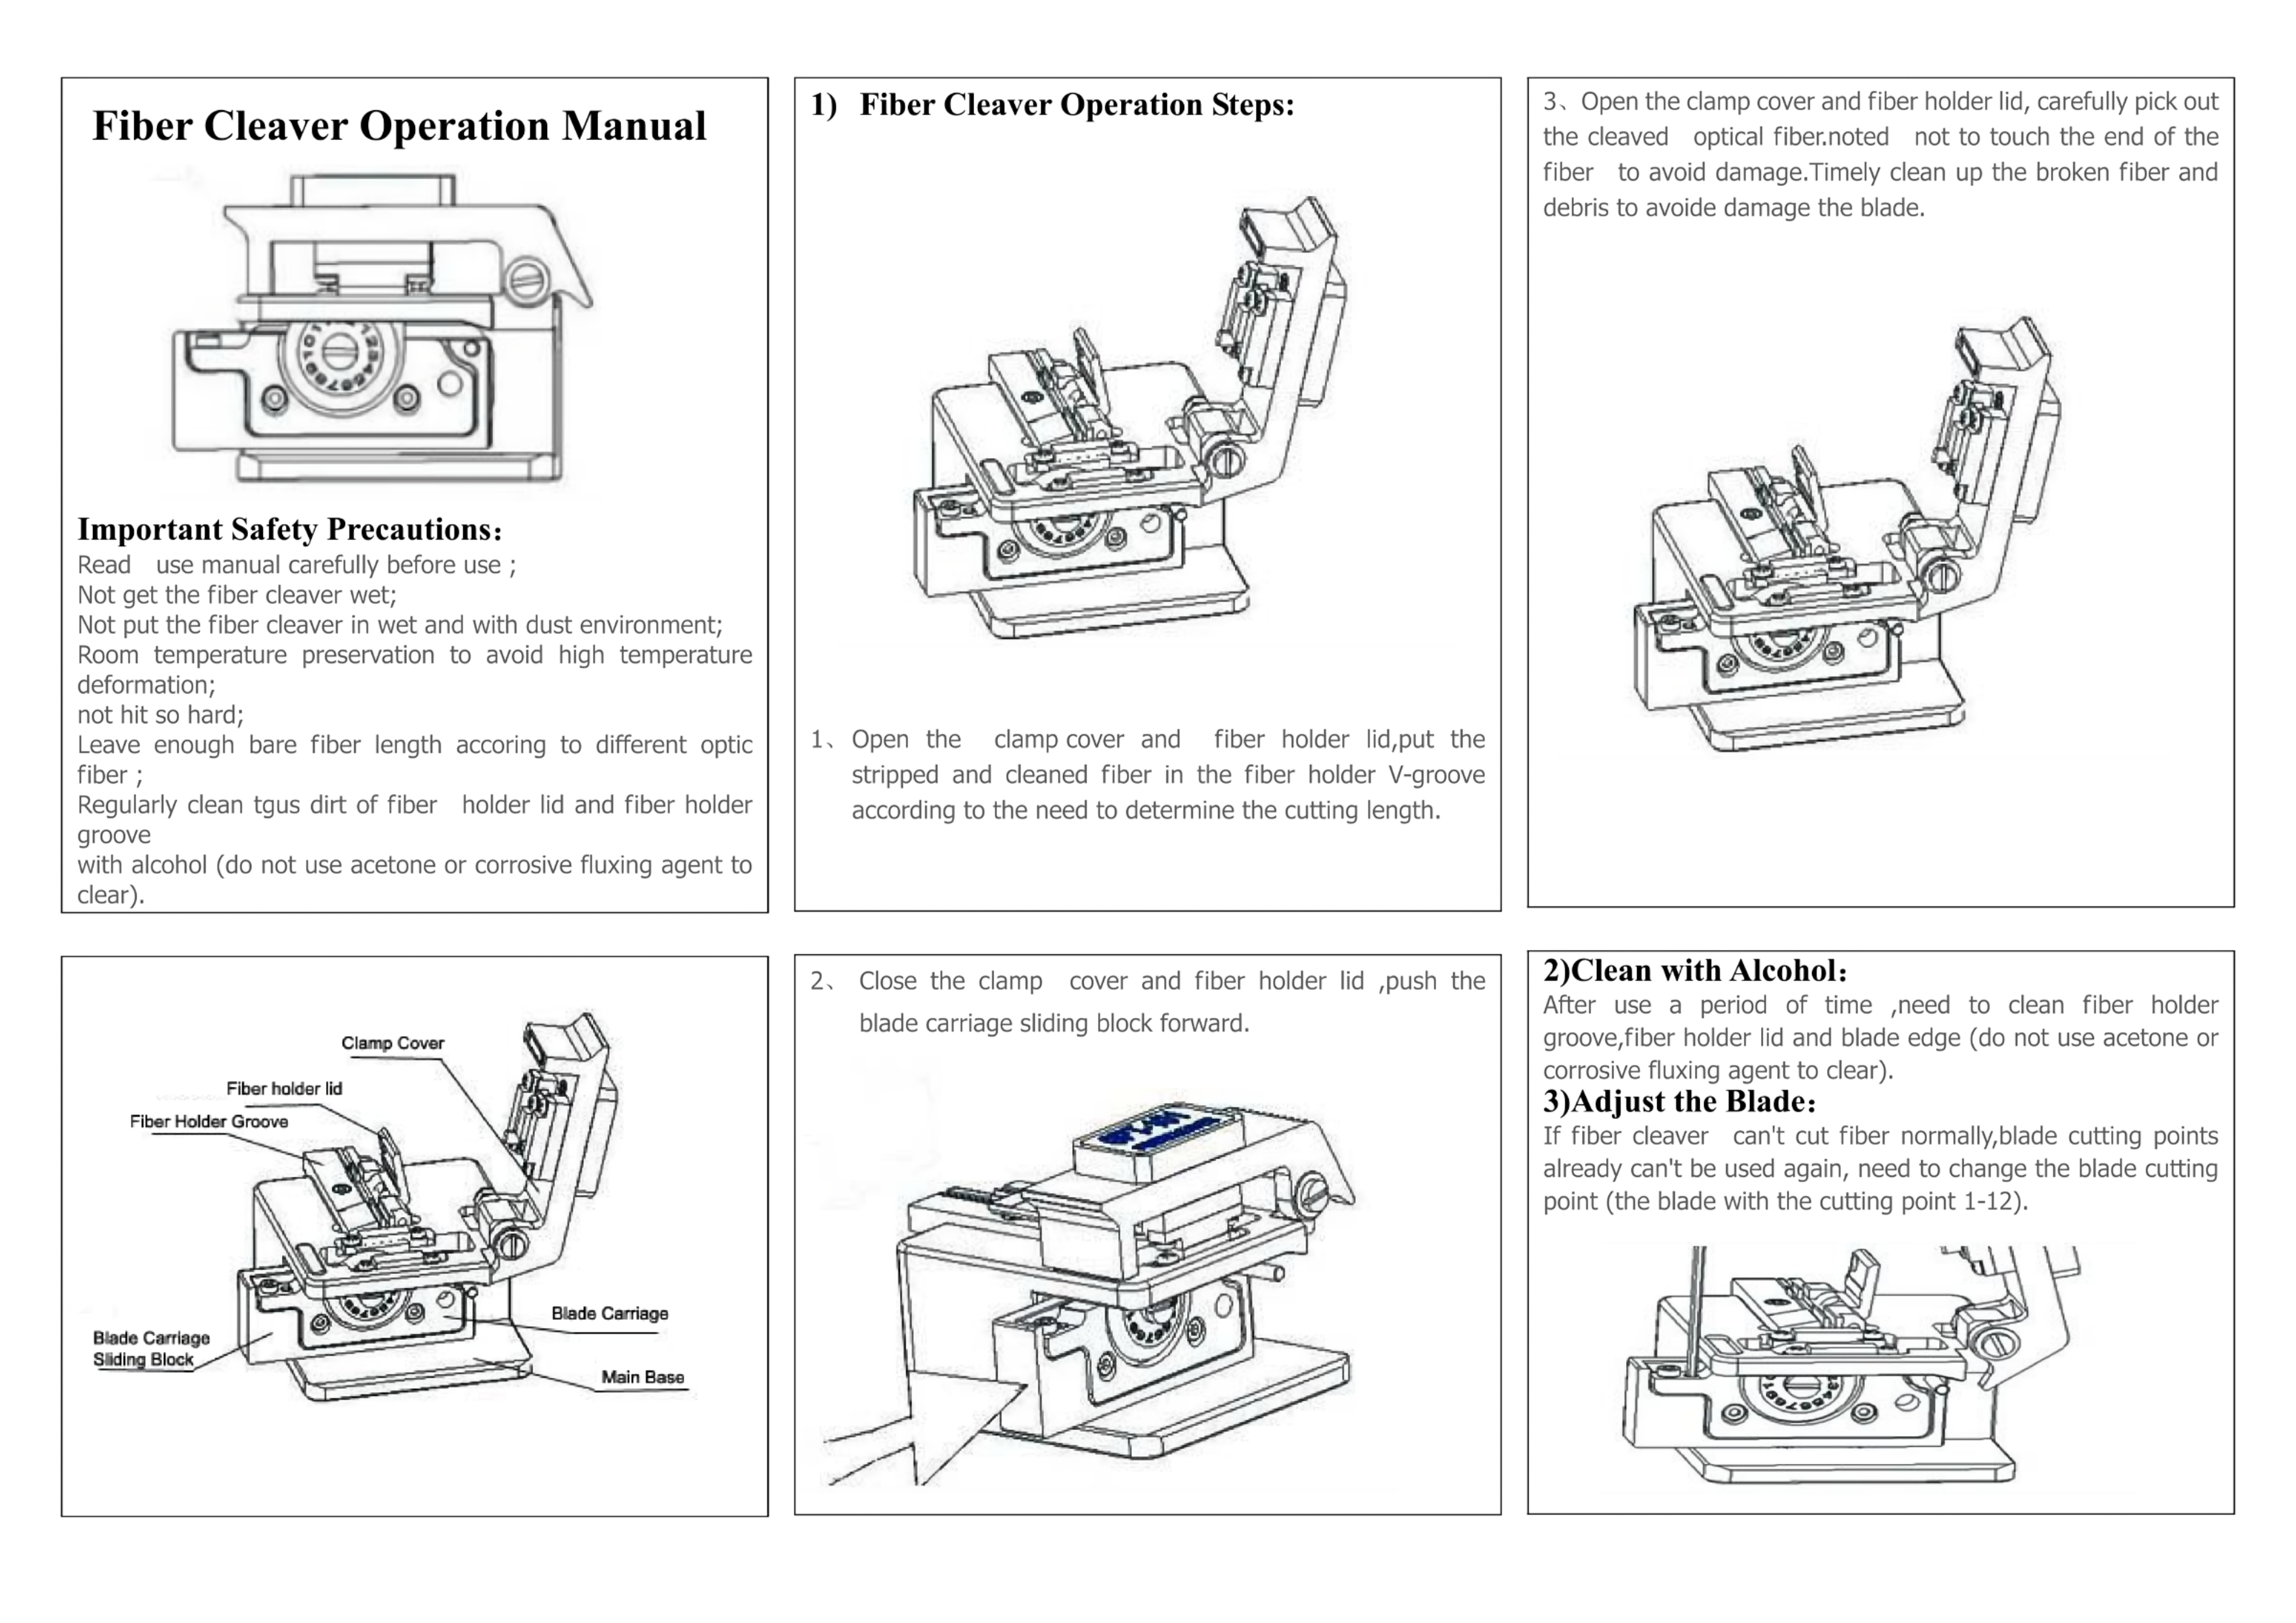 How to use fiber optic cleaver correctly（1）